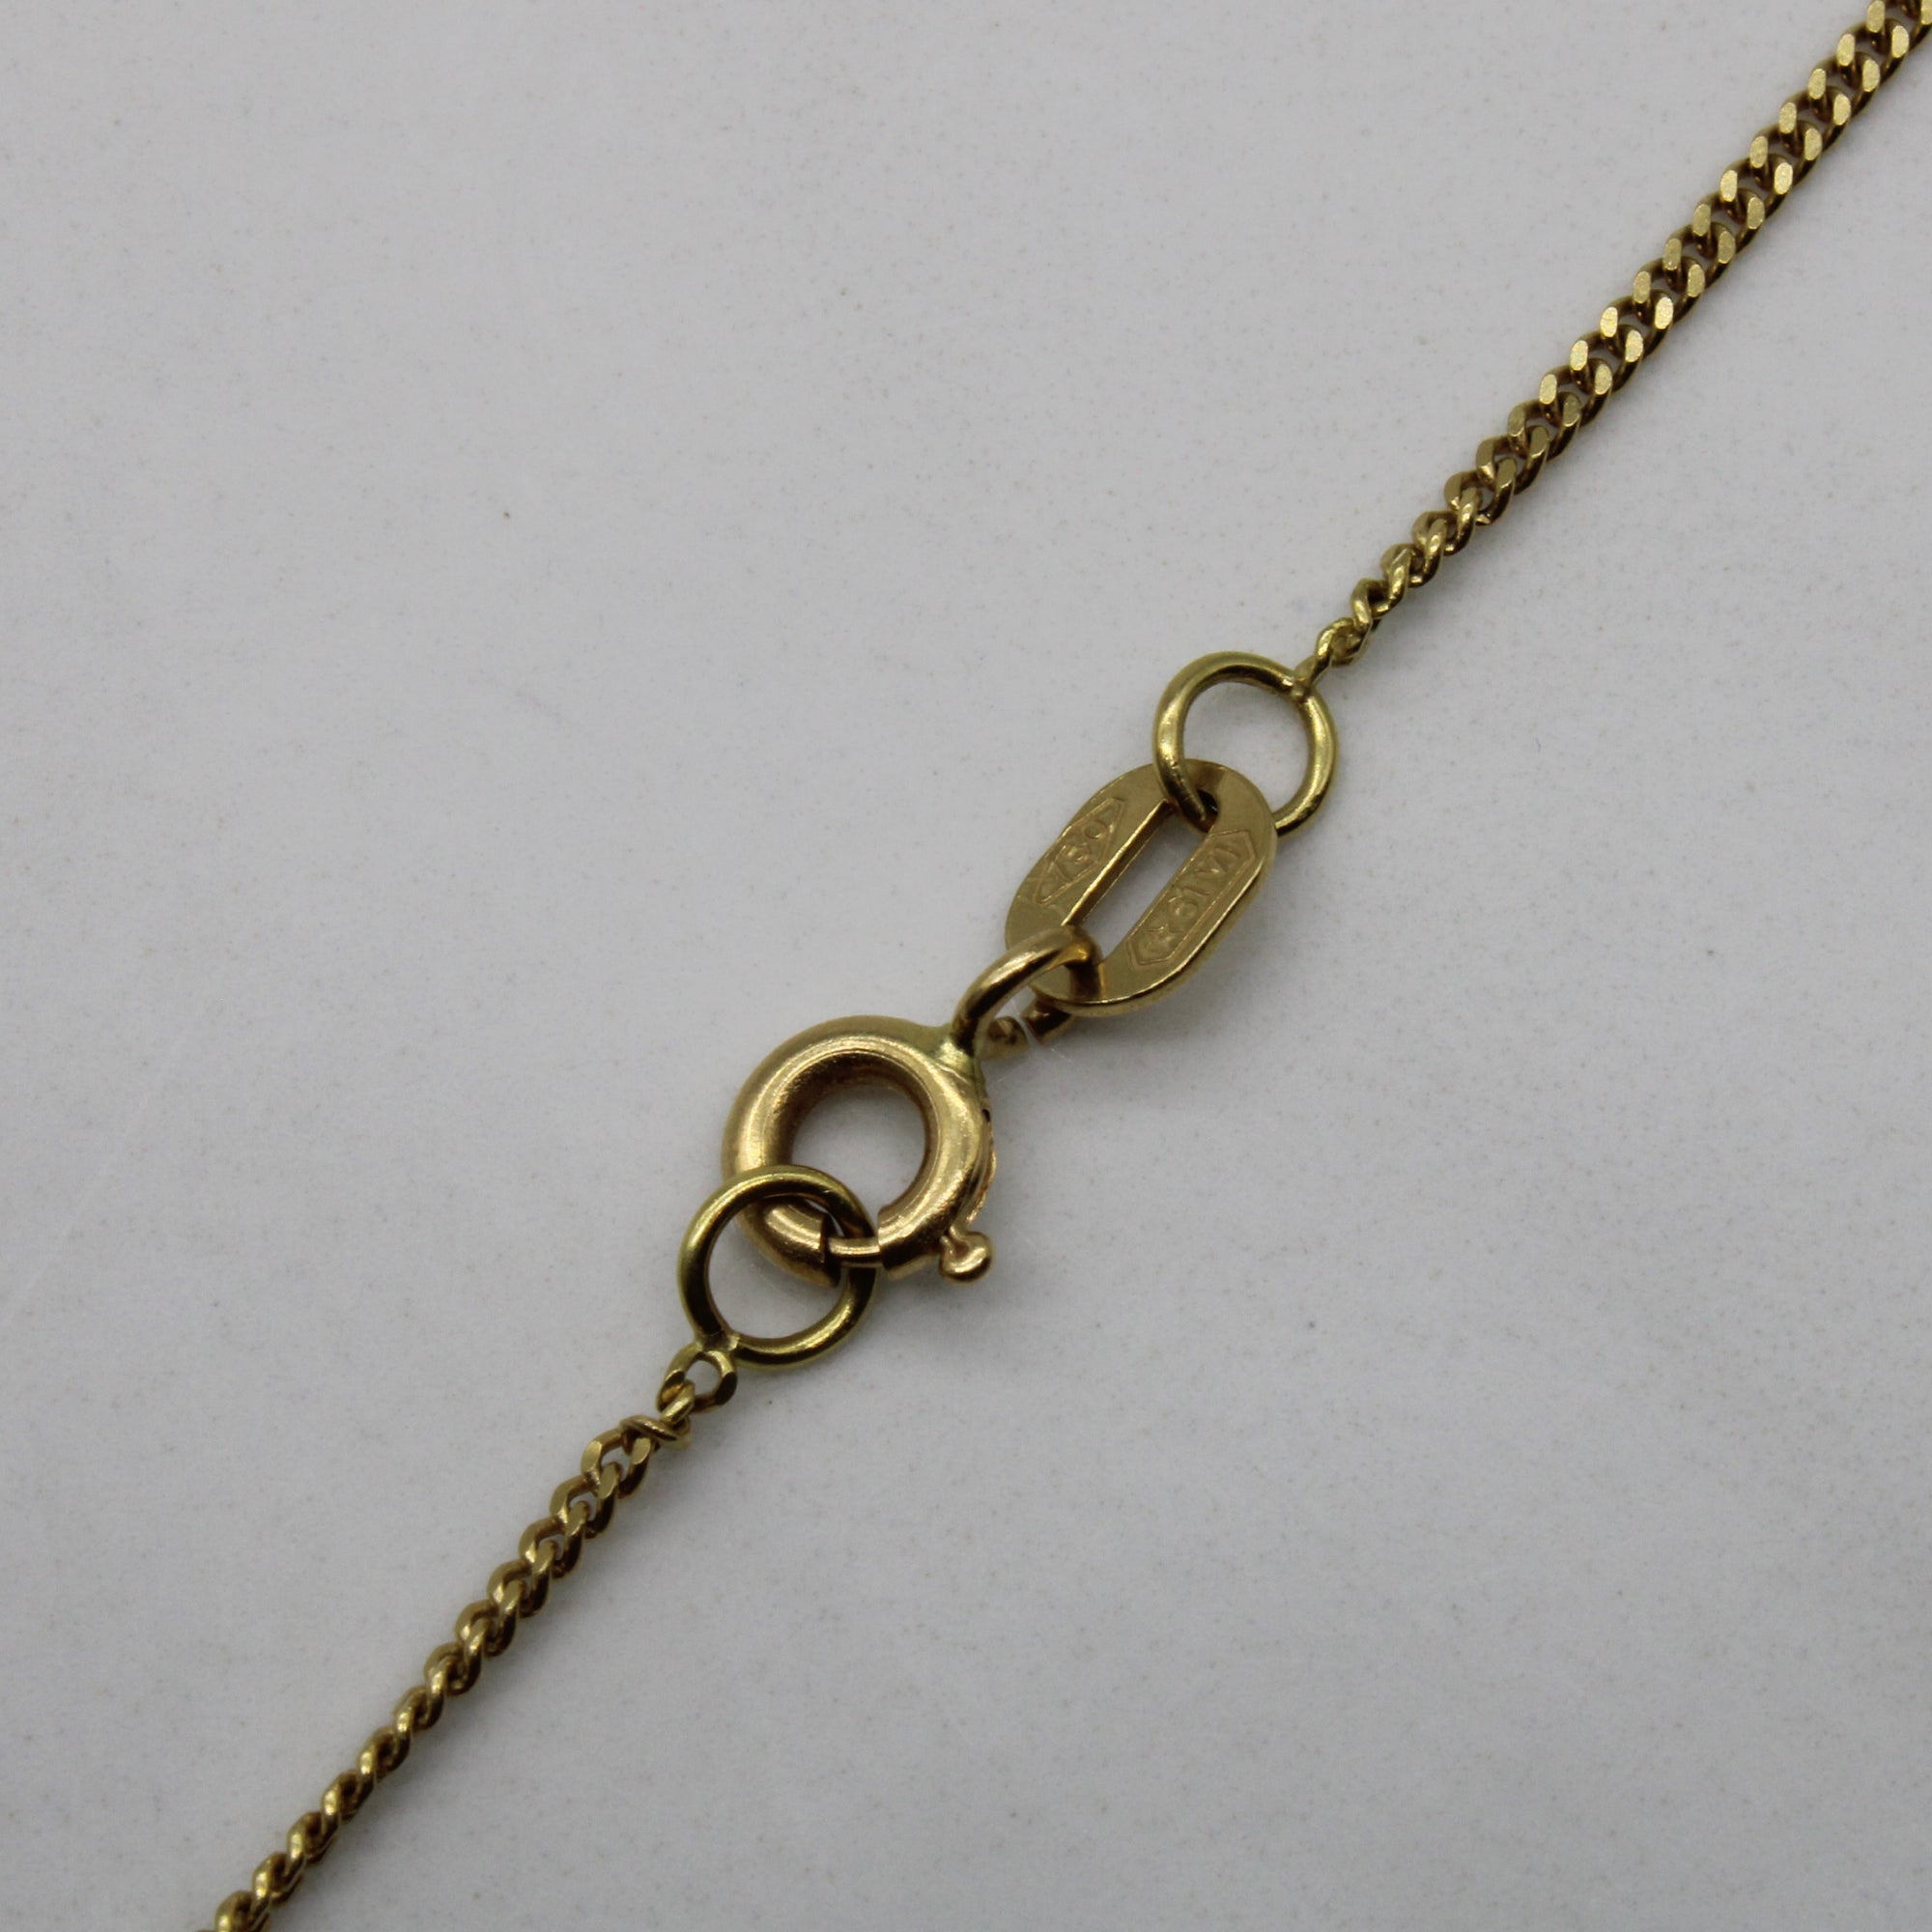 18k Yellow Gold Curb Chain | 18